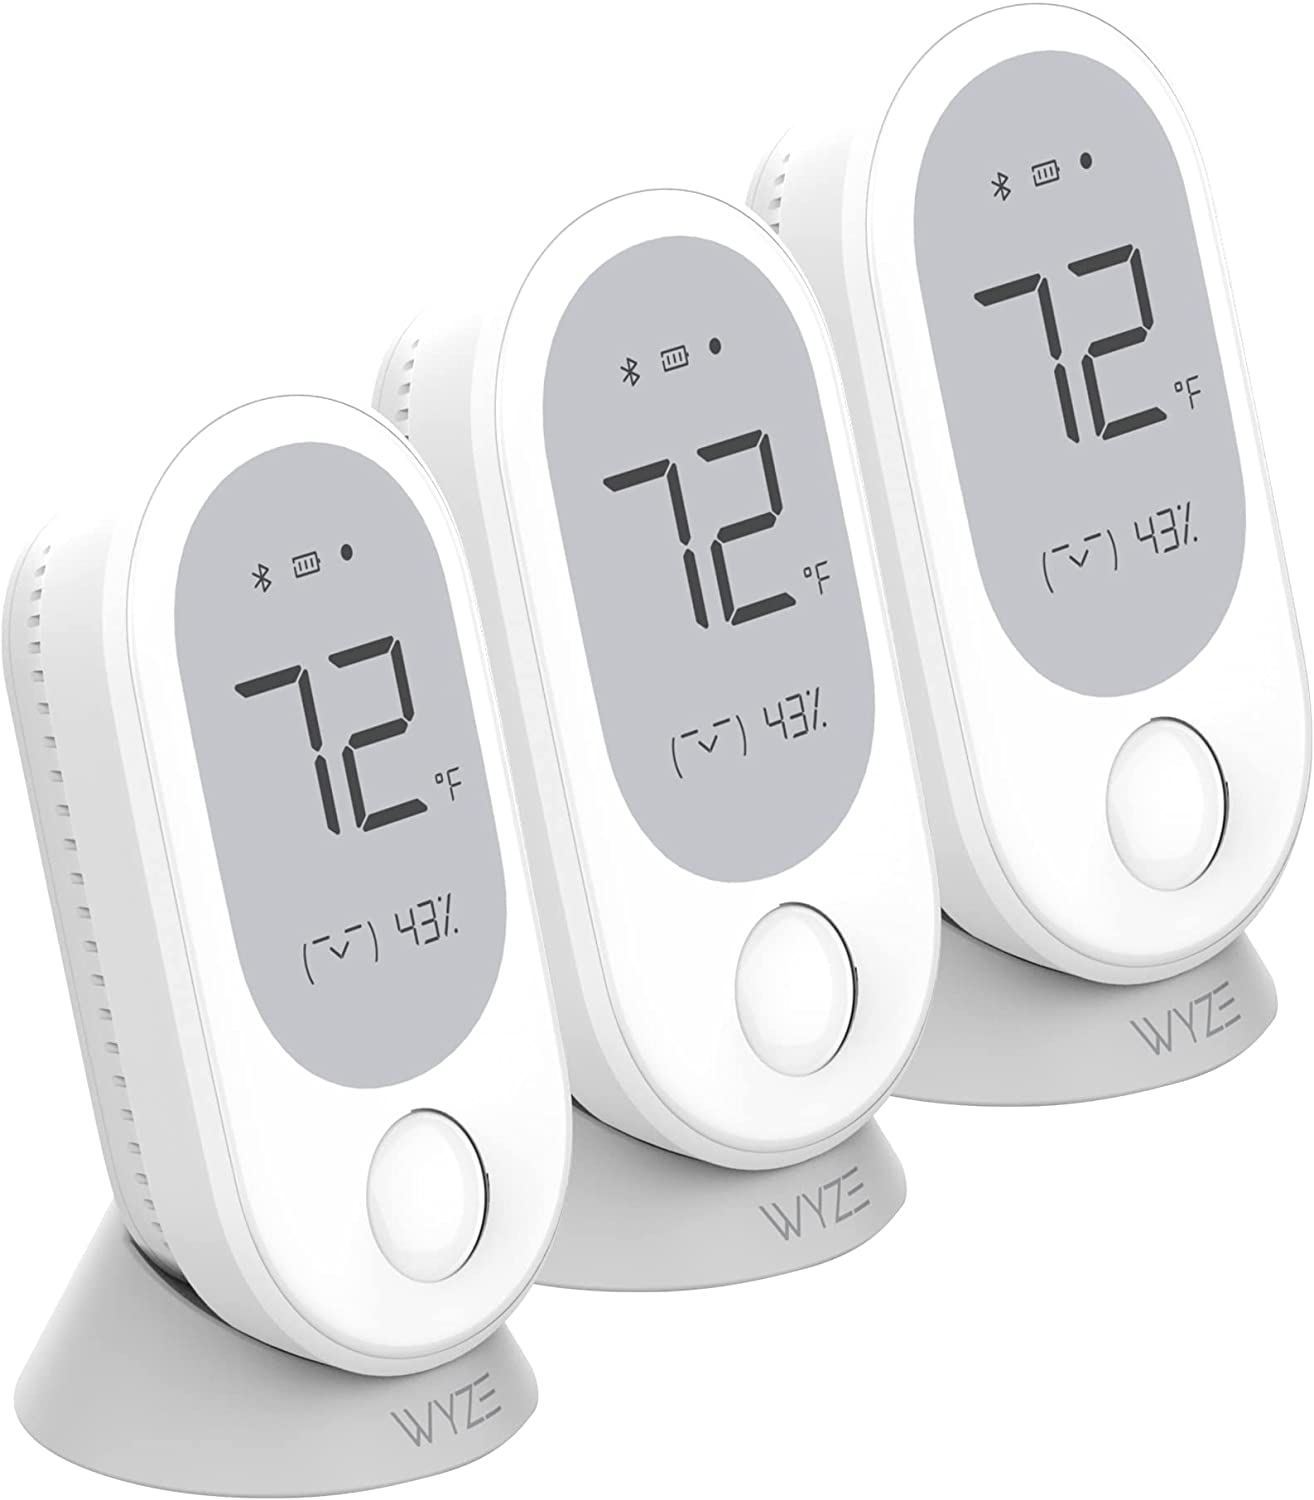 Wyze Thermostat Smart Room Sensors, Detects Temperature, Humidity, and Motion, Remote Viewing, Always-On Display, 3-Pack (Wyze Thermostat Required)